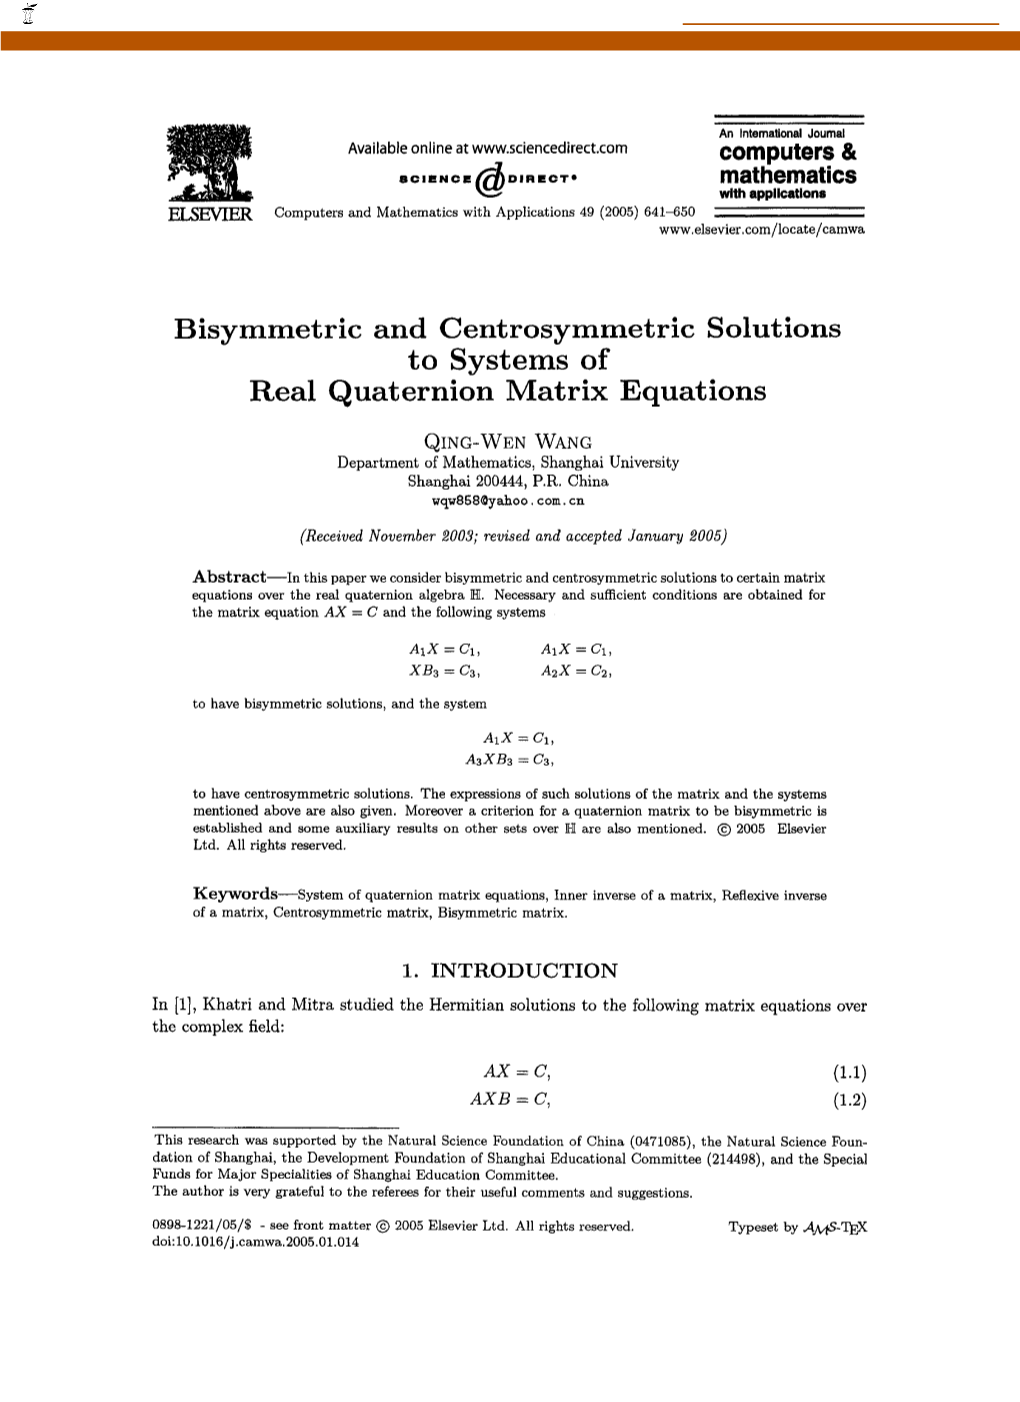 Bisymmetric and Centrosymmetric Solutions to Systems of Real Quaternion Matrix Equations